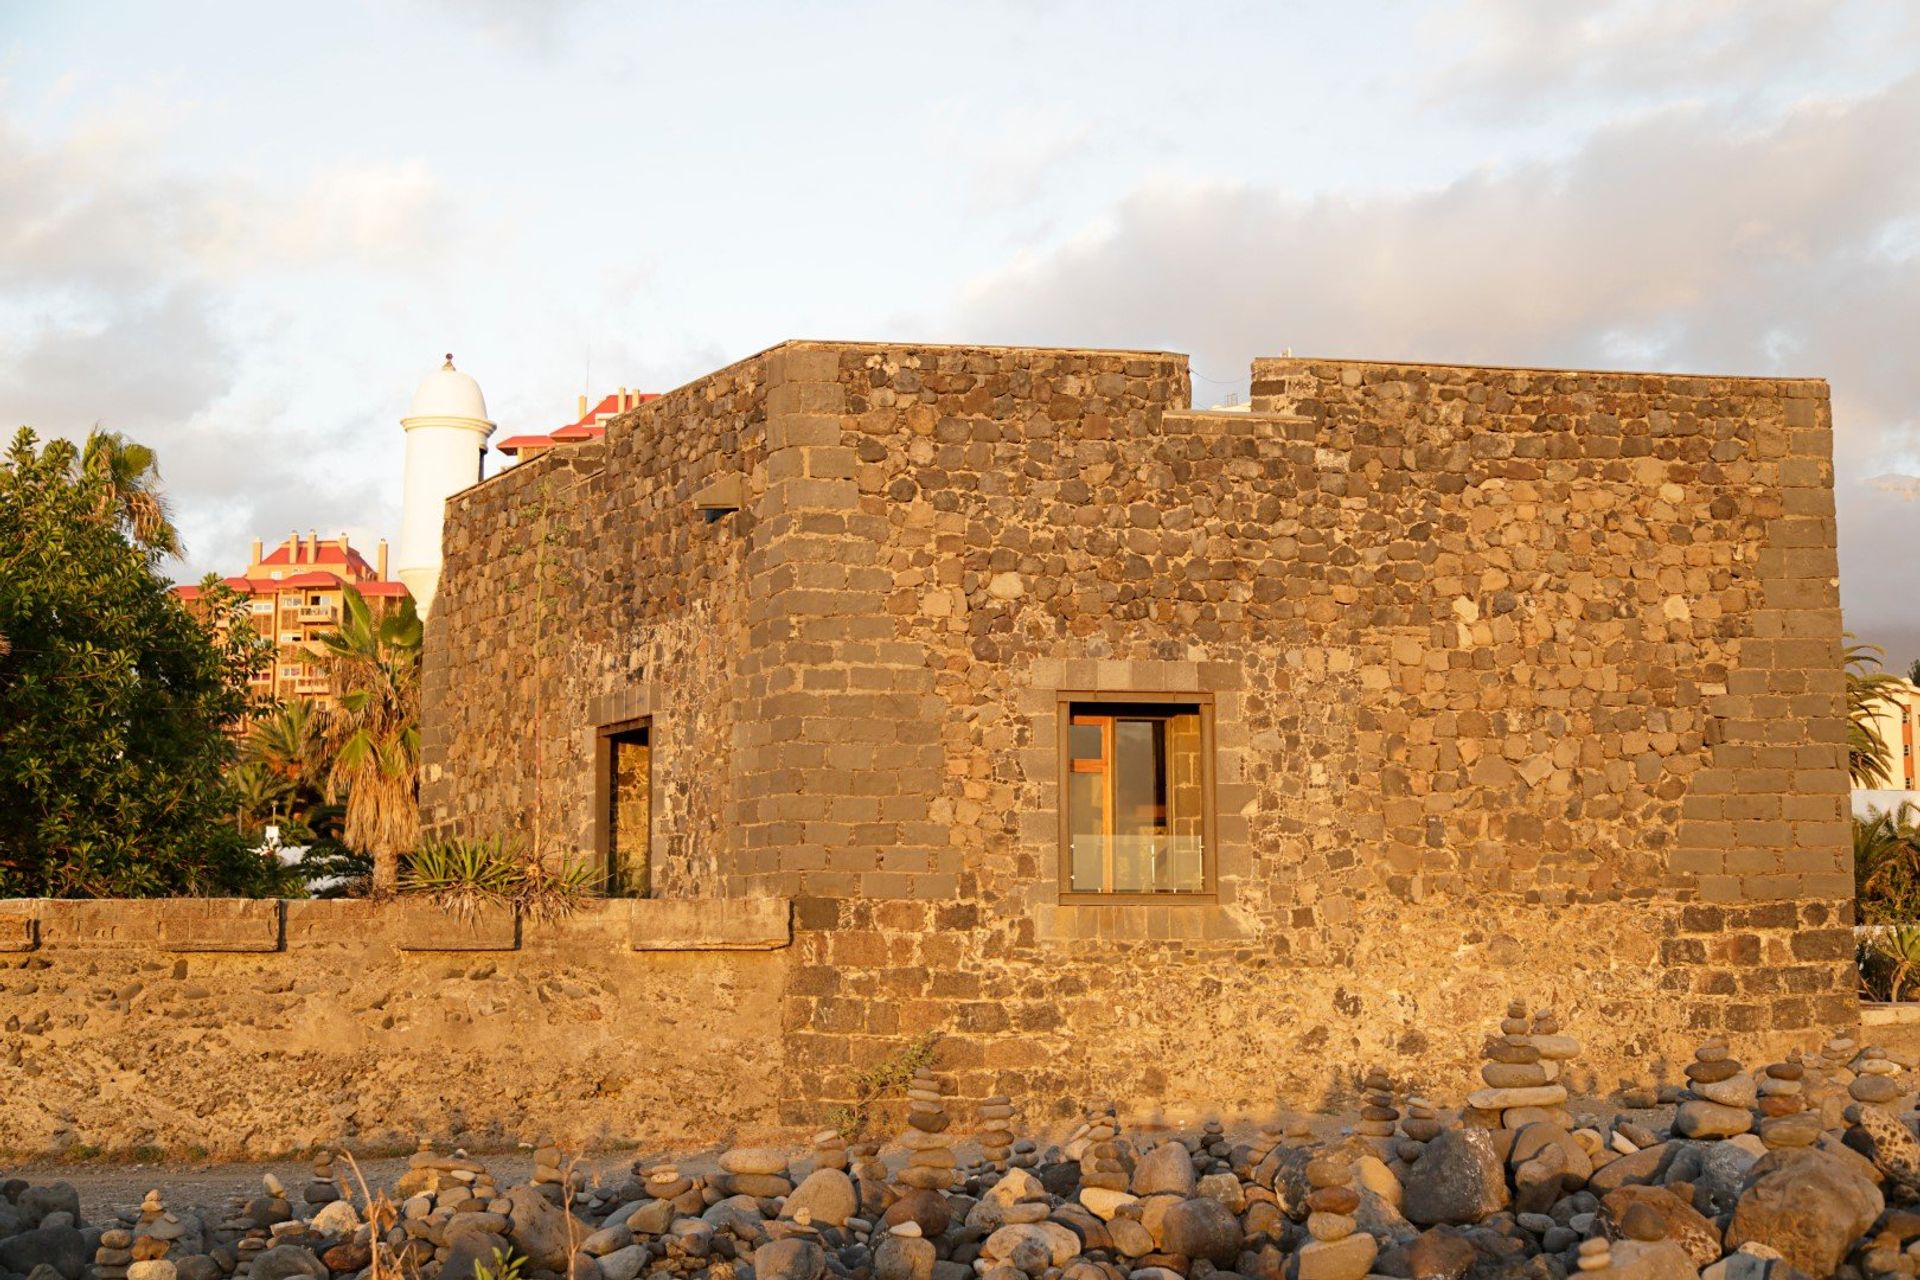 Explore the town's fascinating local history at 17th century San Felipe Castle next to Jardín beach